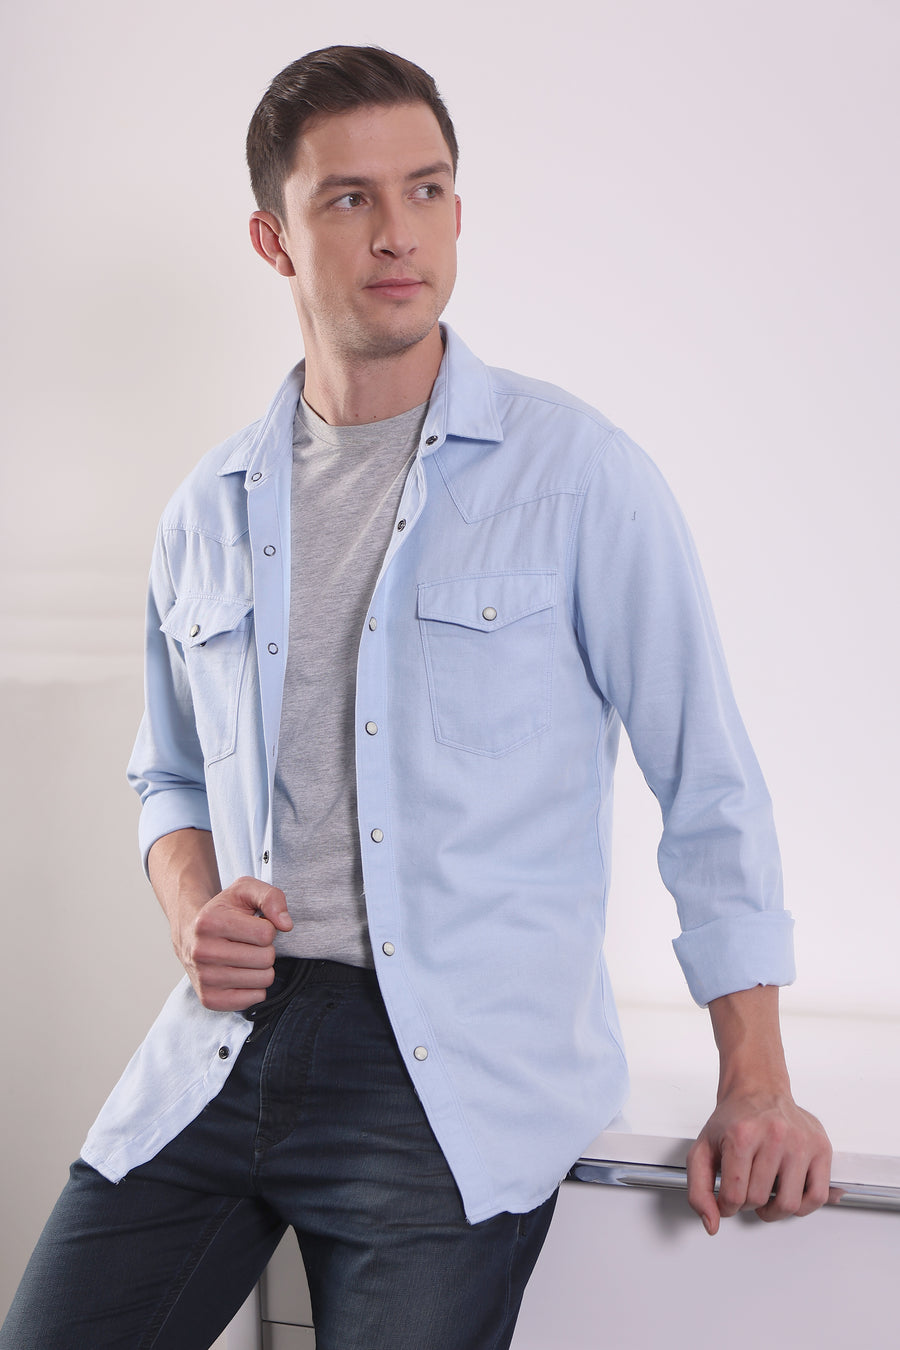 Trewen - Double Pocket Shirt With Snap Button - Sky